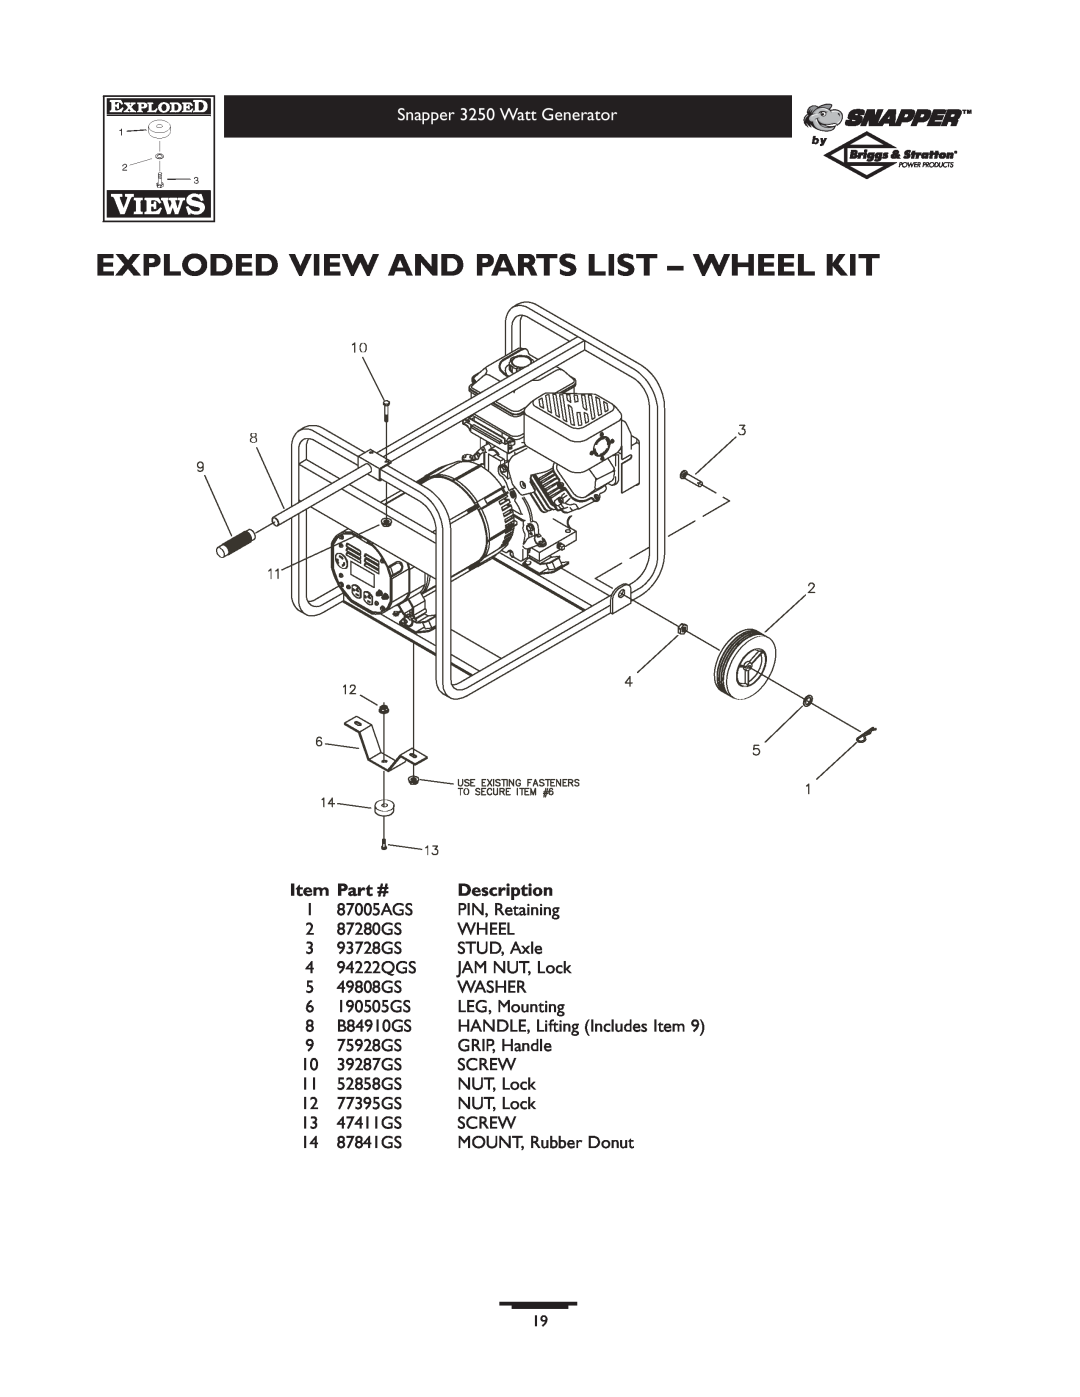 Snapper 1667-0 owner manual Exploded View And Parts List - Wheel Kit, Snapper 3250 Watt Generator, Description 